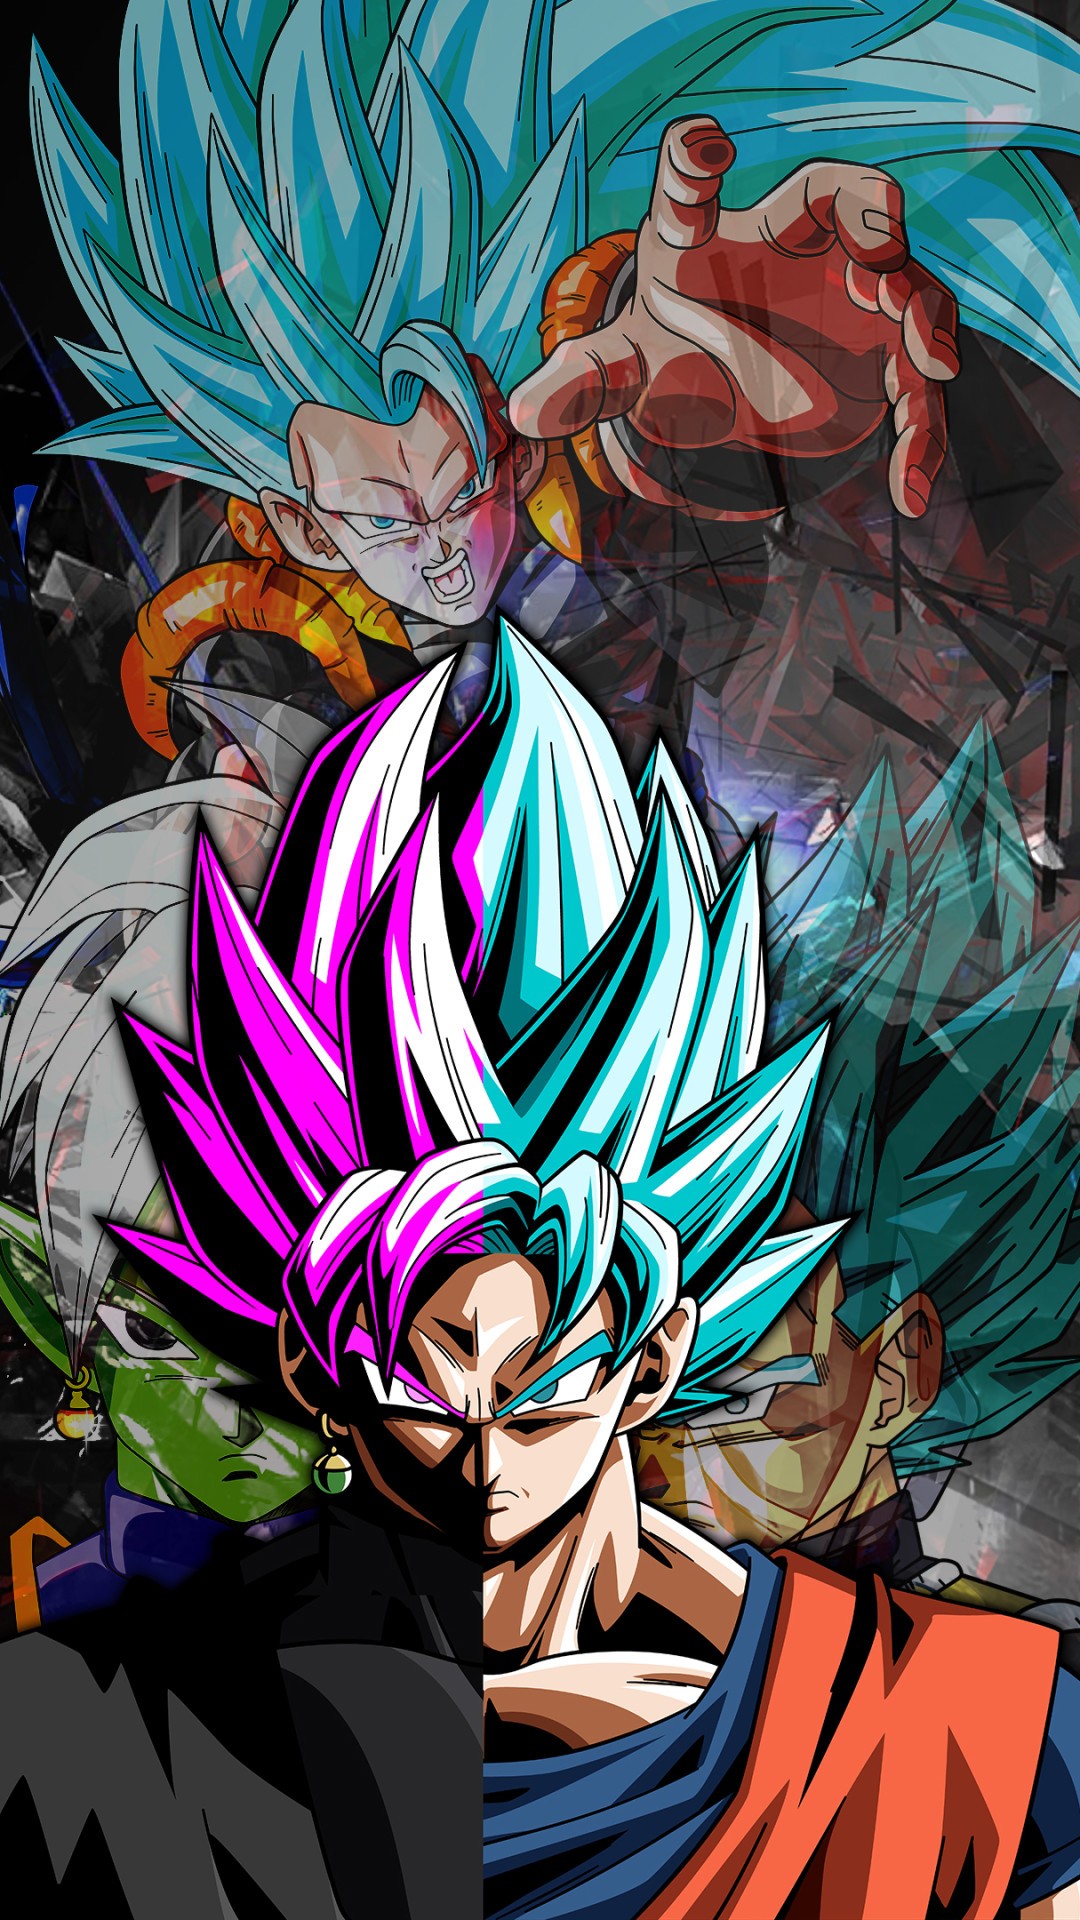 Wallpaper iPhone Black Goku with image resolution 1080x1920 pixel. You can make this wallpaper for your iPhone 5, 6, 7, 8, X backgrounds, Mobile Screensaver, or iPad Lock Screen